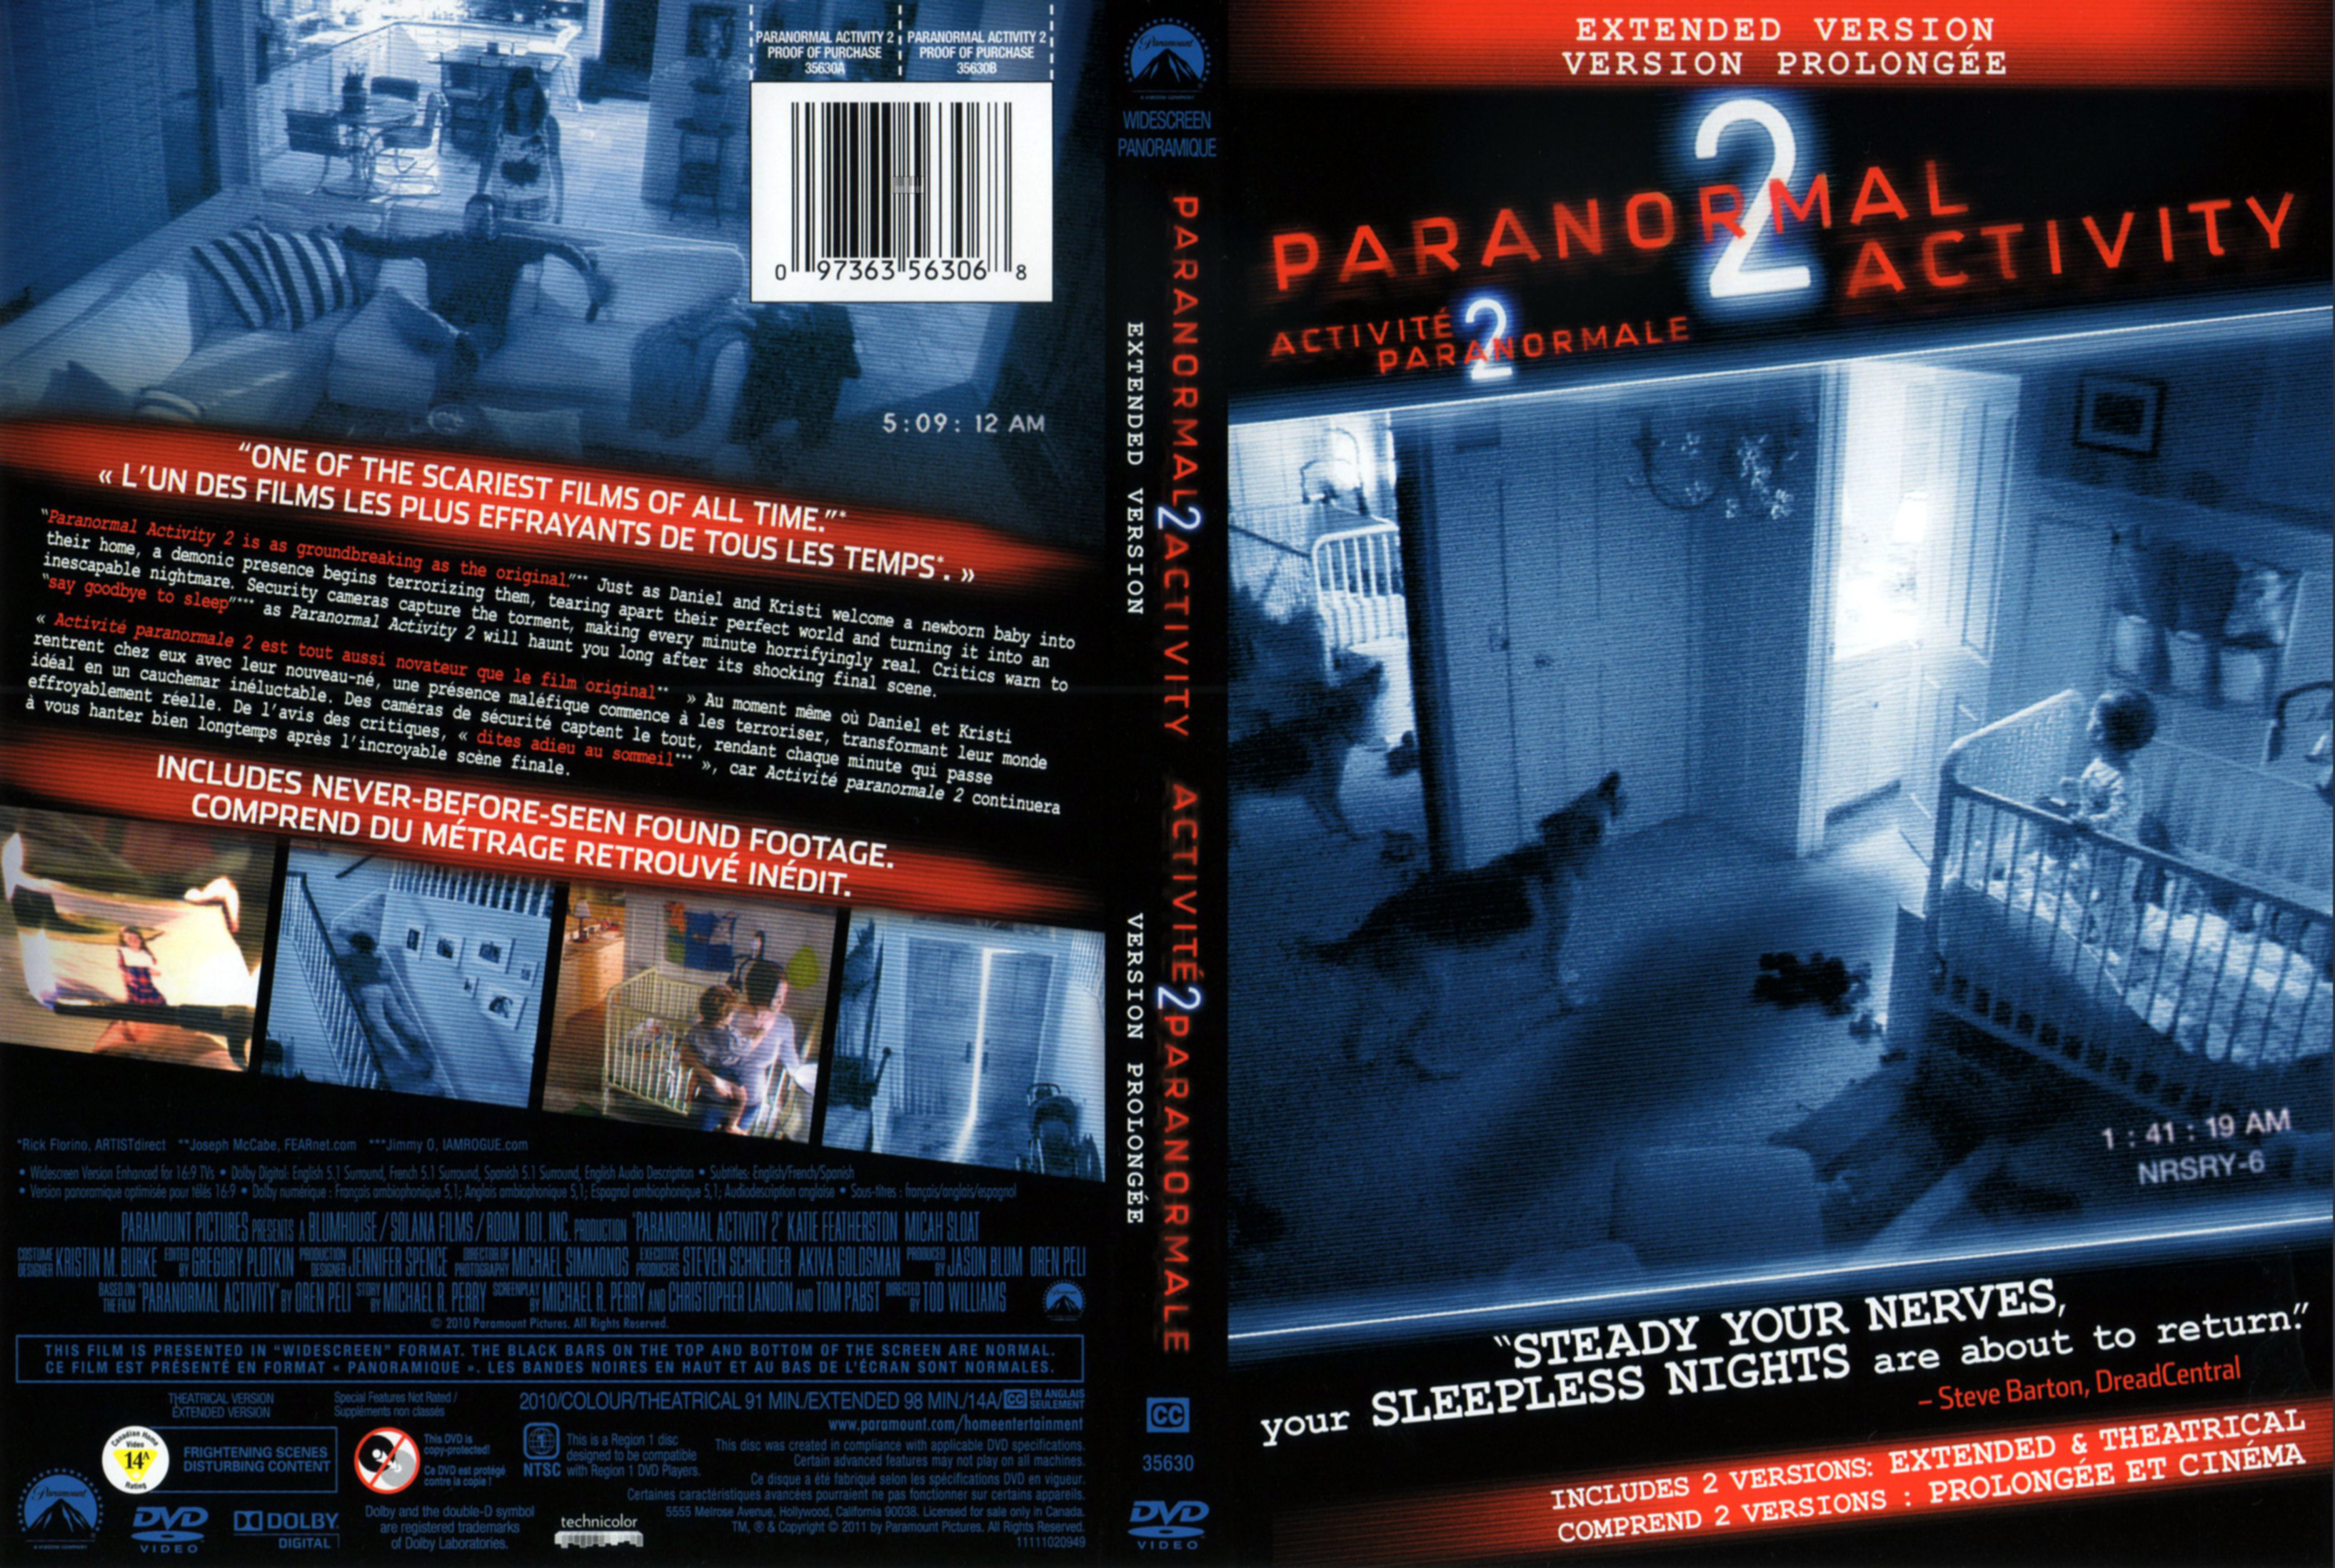 Jaquette DVD Paranormal activity 2 (Canadienne)